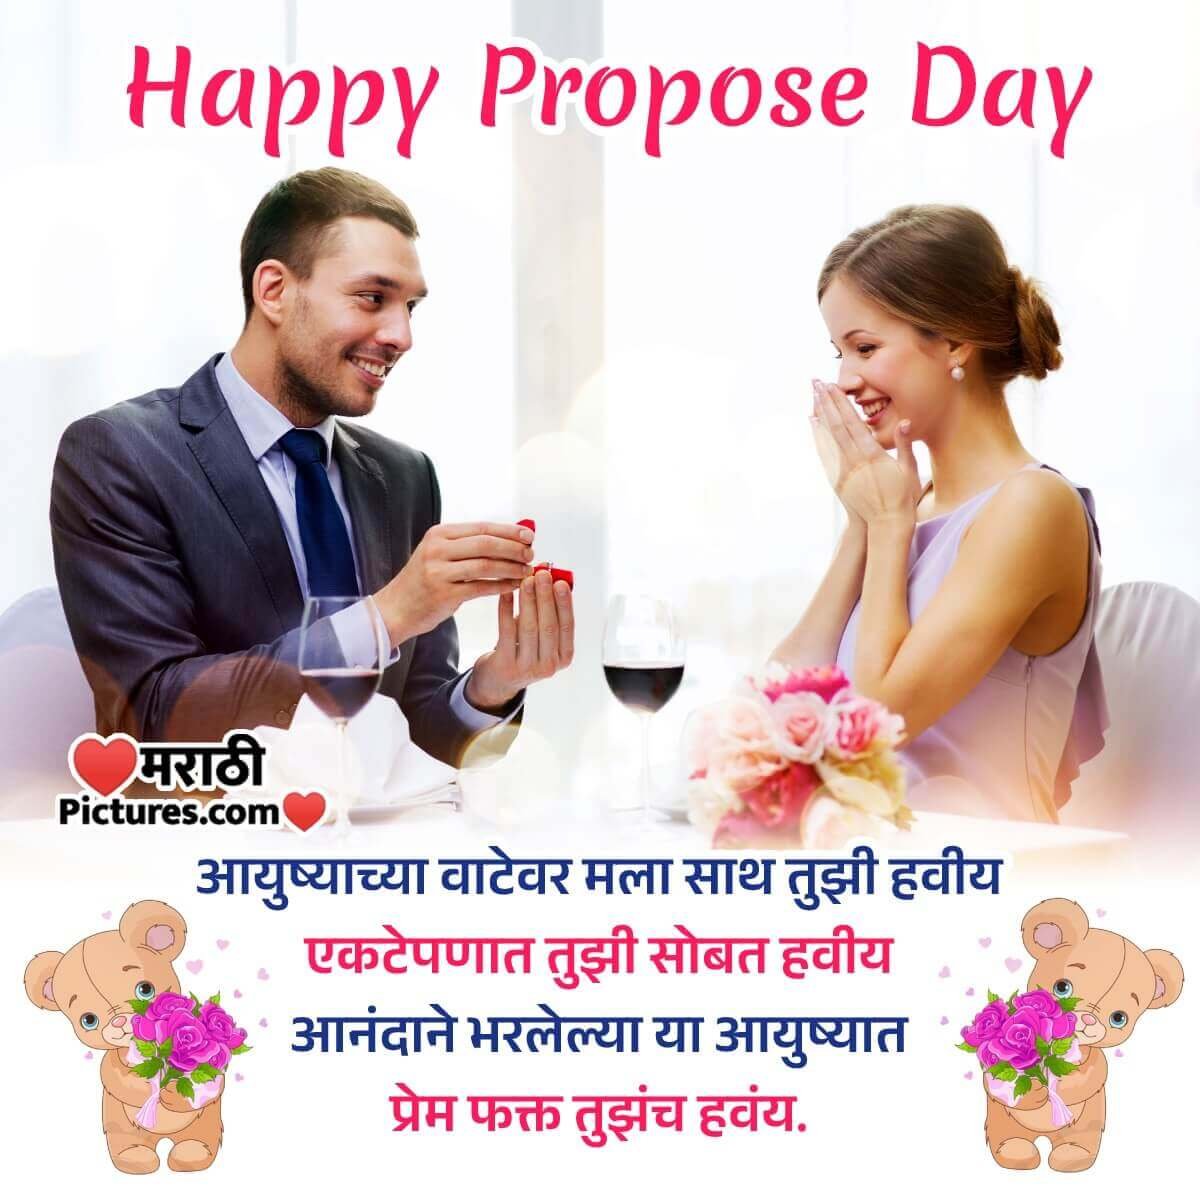 Happy Propose Day Message Pic For Gf